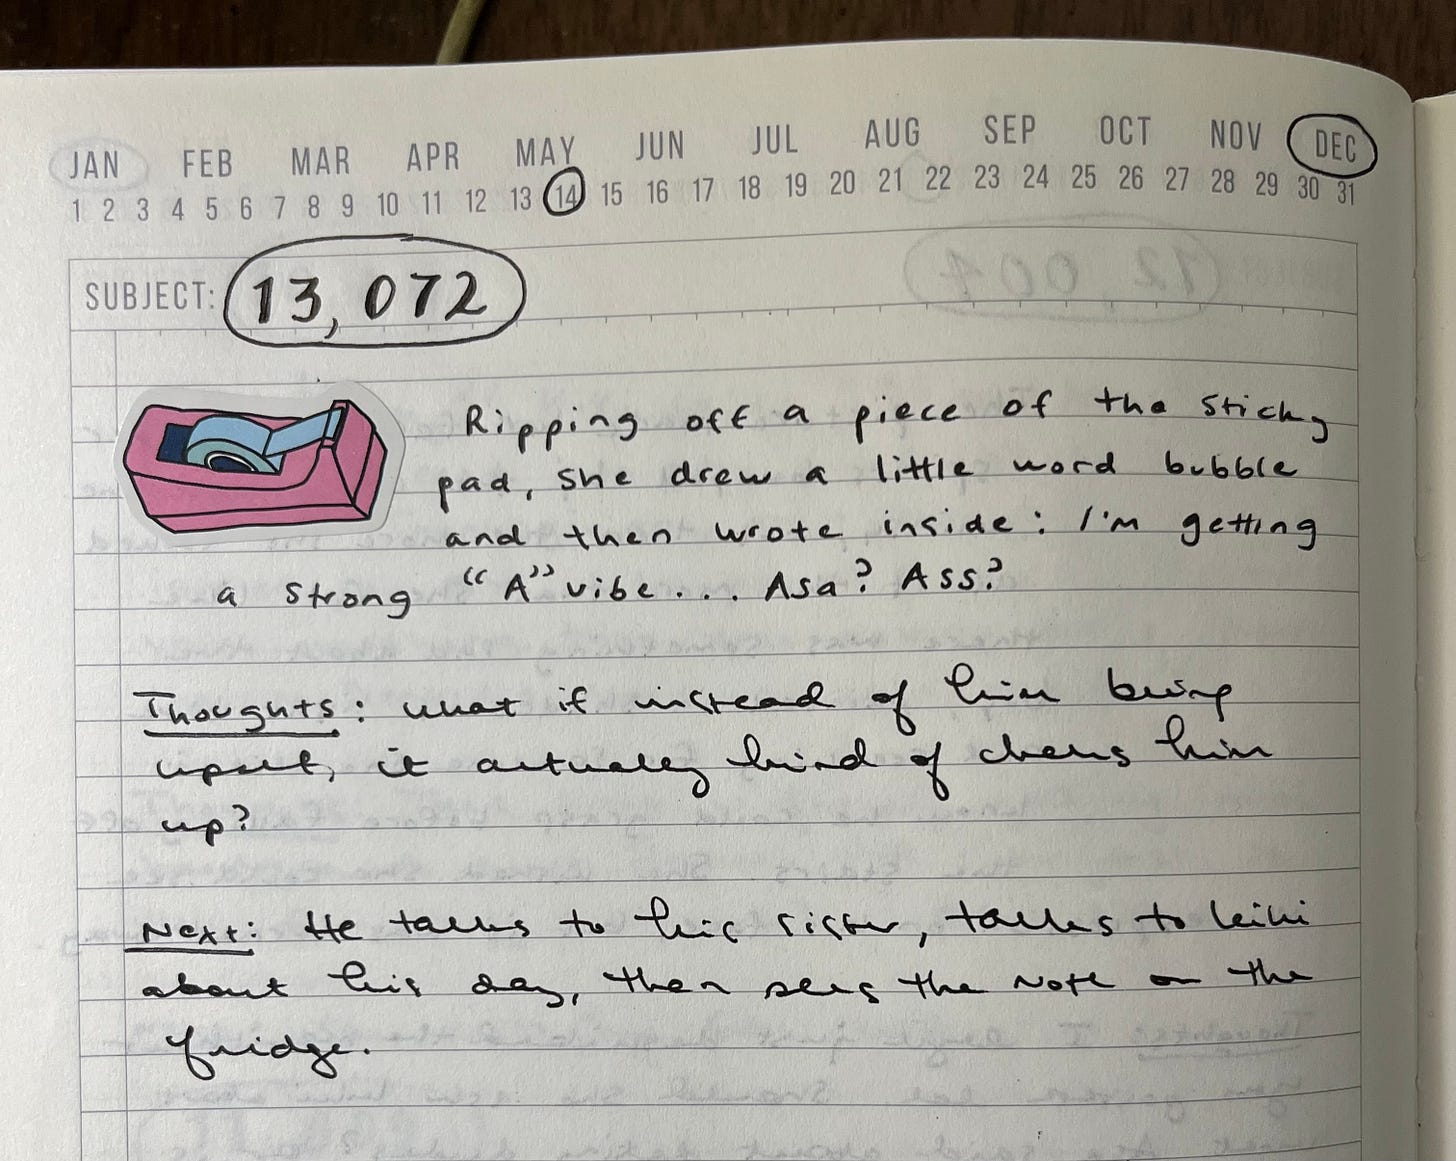 Image from my Writing Notebook dated December 14, with a sticker of a pink tape dispenser, and words as typed below.